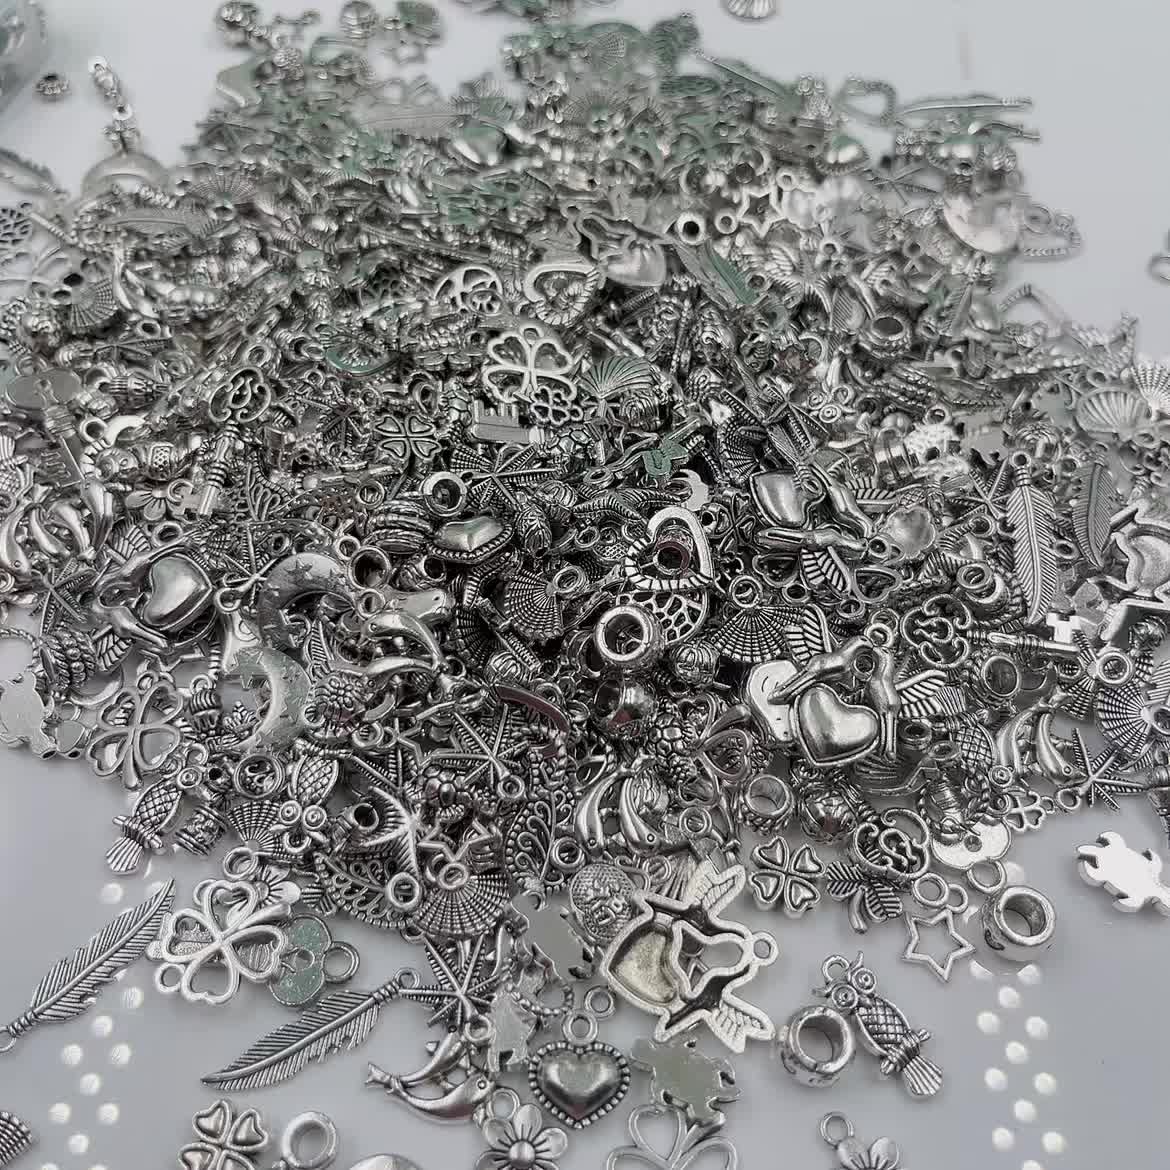 CHuangQi 100pcs Bulk Lots Jewelry Making Charms, Mixed Smooth Metal Charms,  Pendants Bracelet Necklace Jewelry Making and DIY Craft Accessories